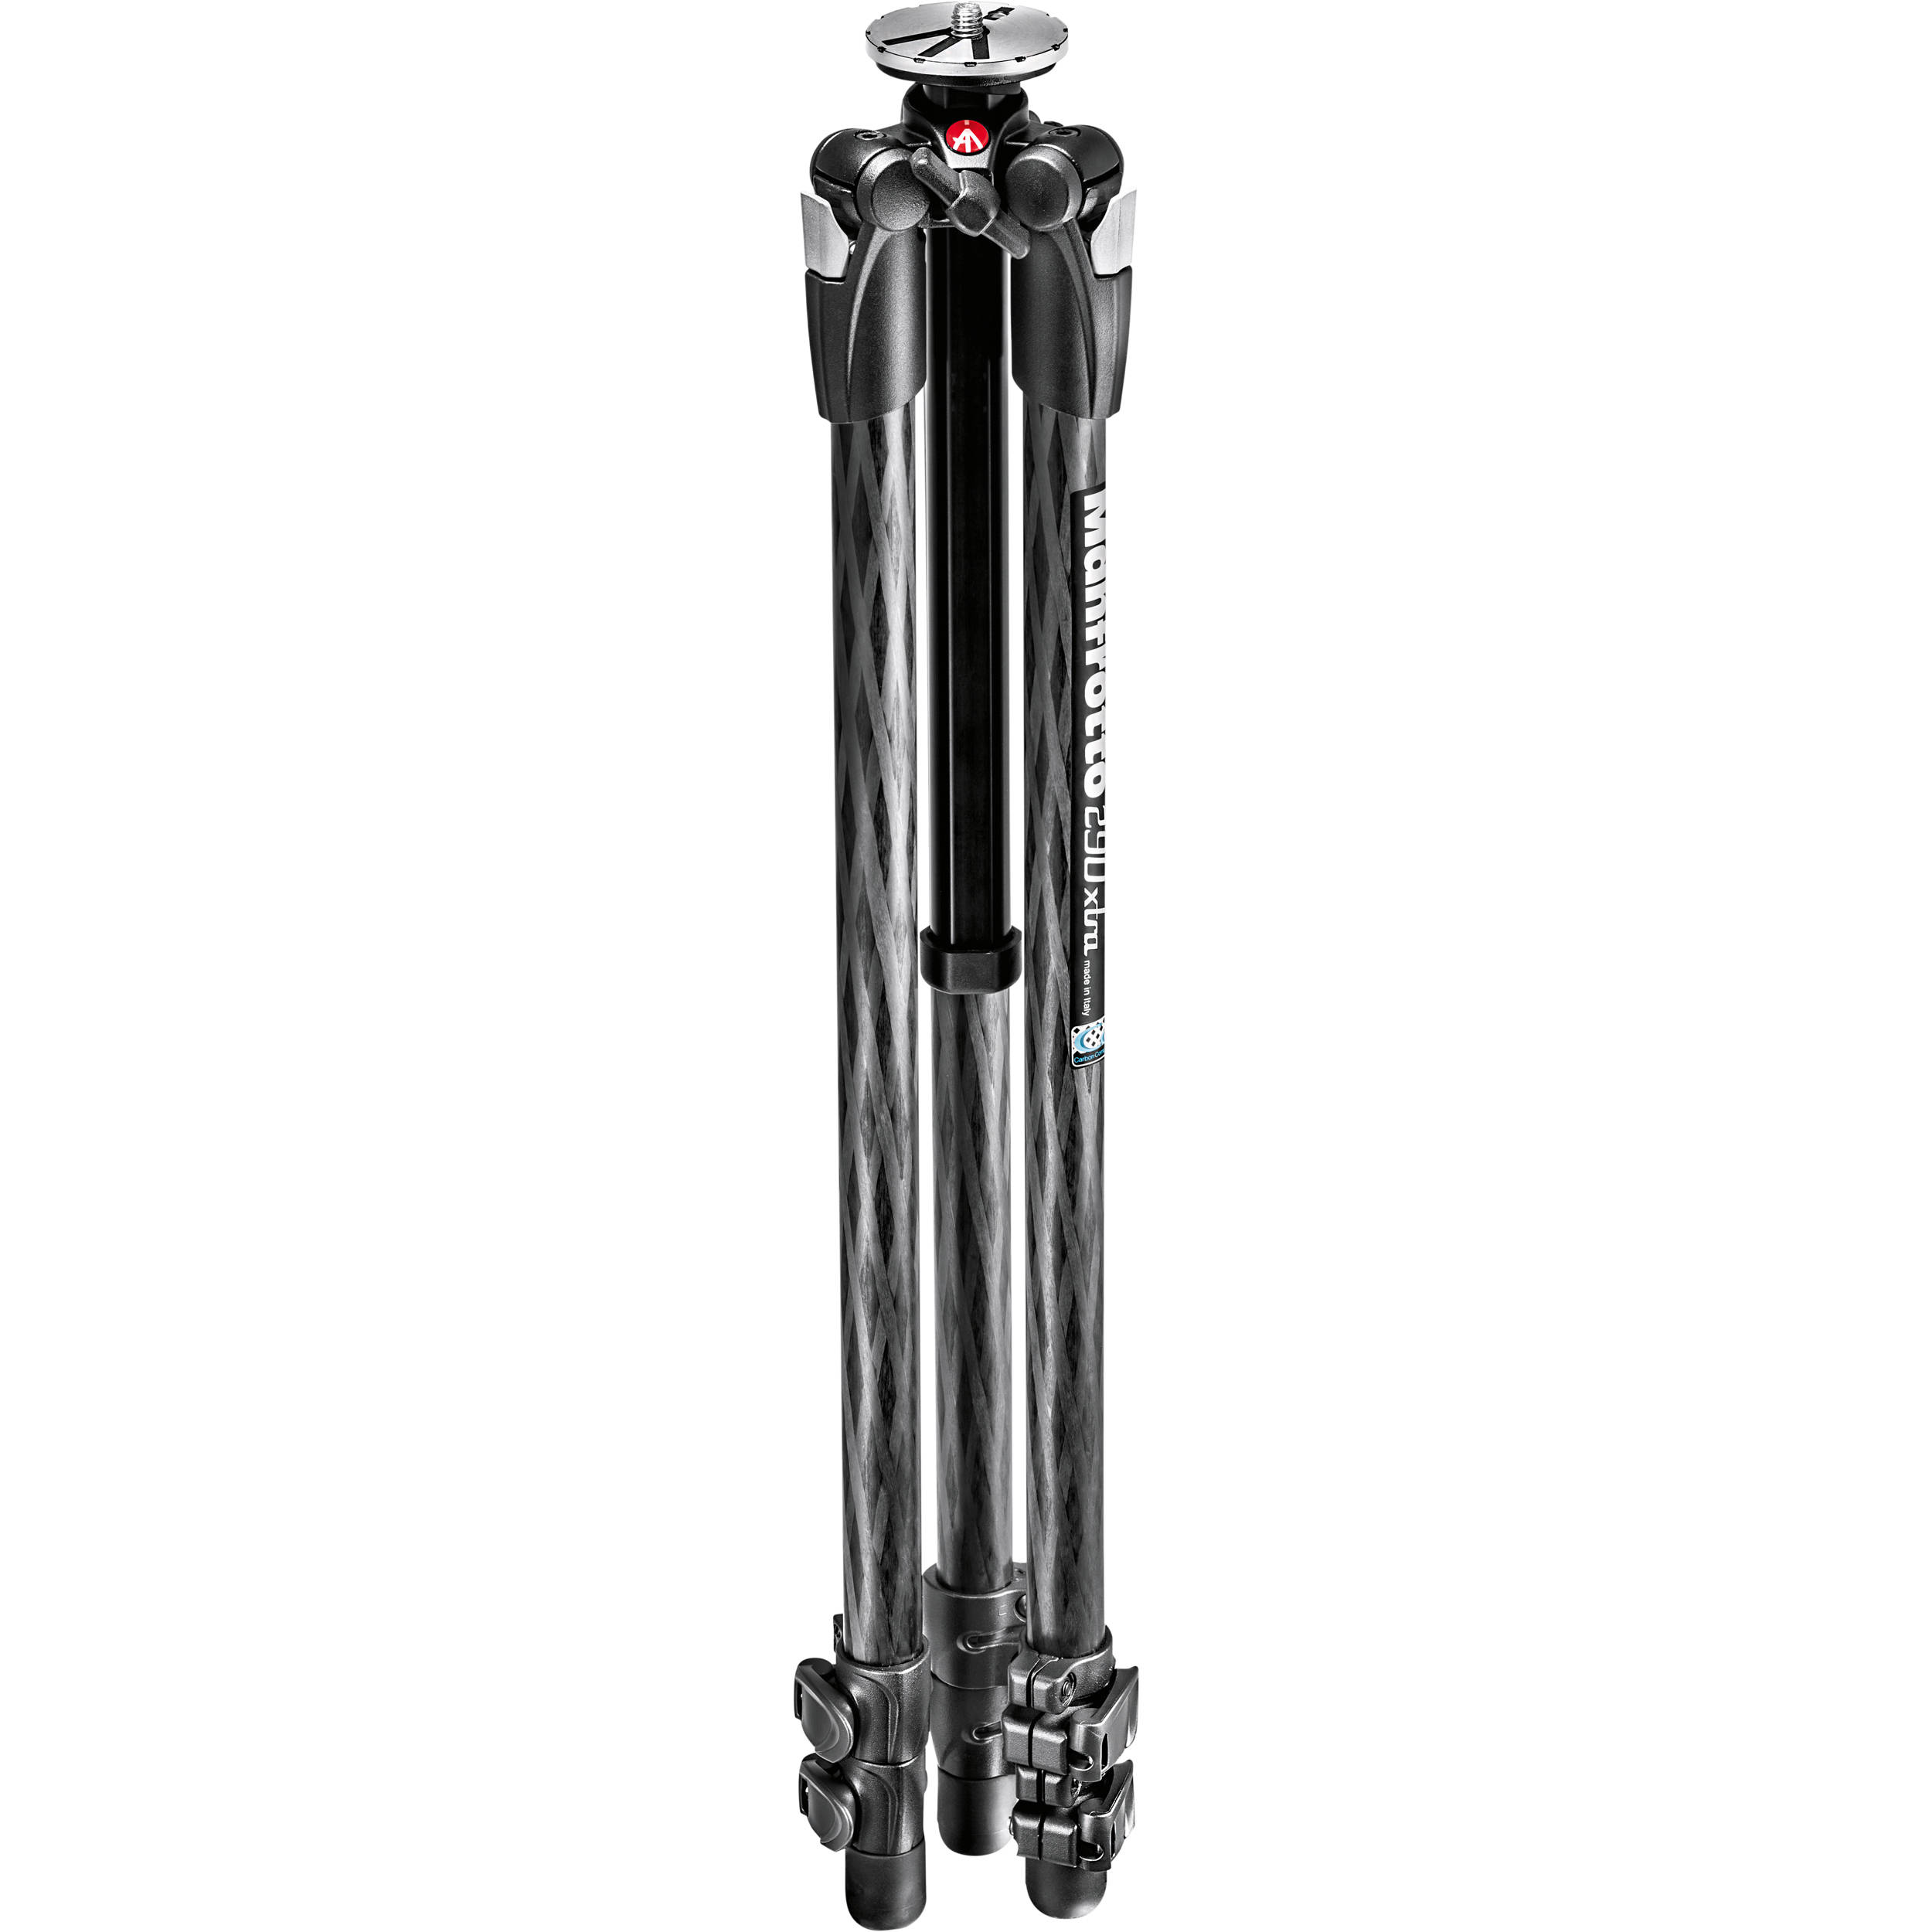 MANFROTTO 290 Extra Carbon Fibre Tripod 3-Section